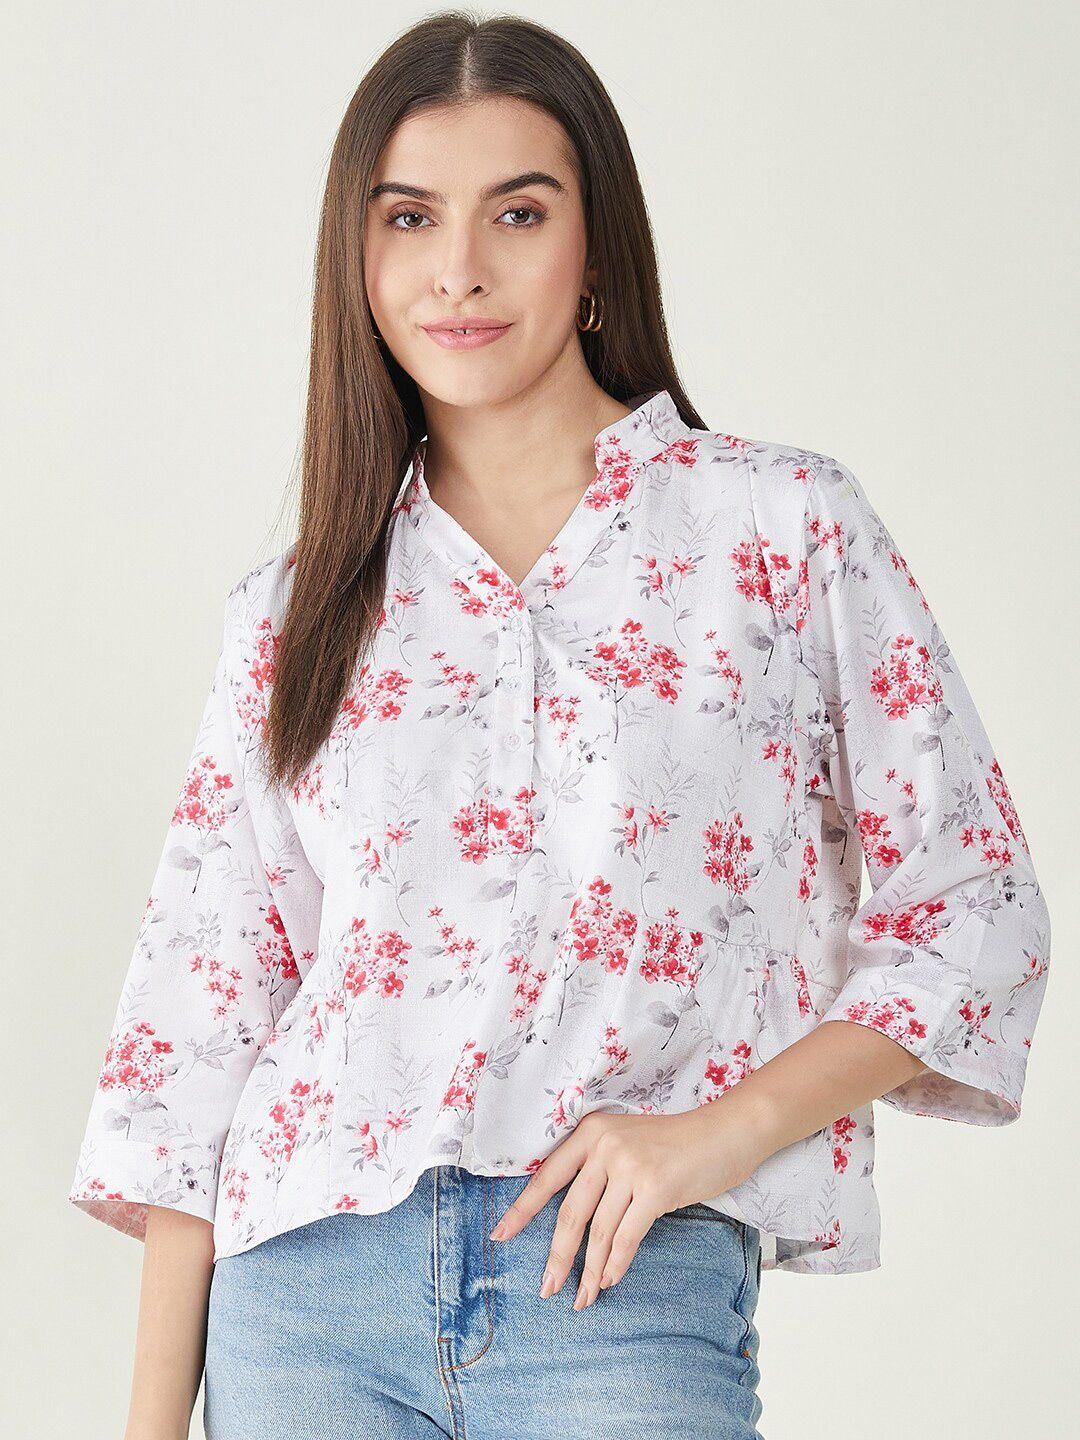 bitterlime floral printed shirt style top